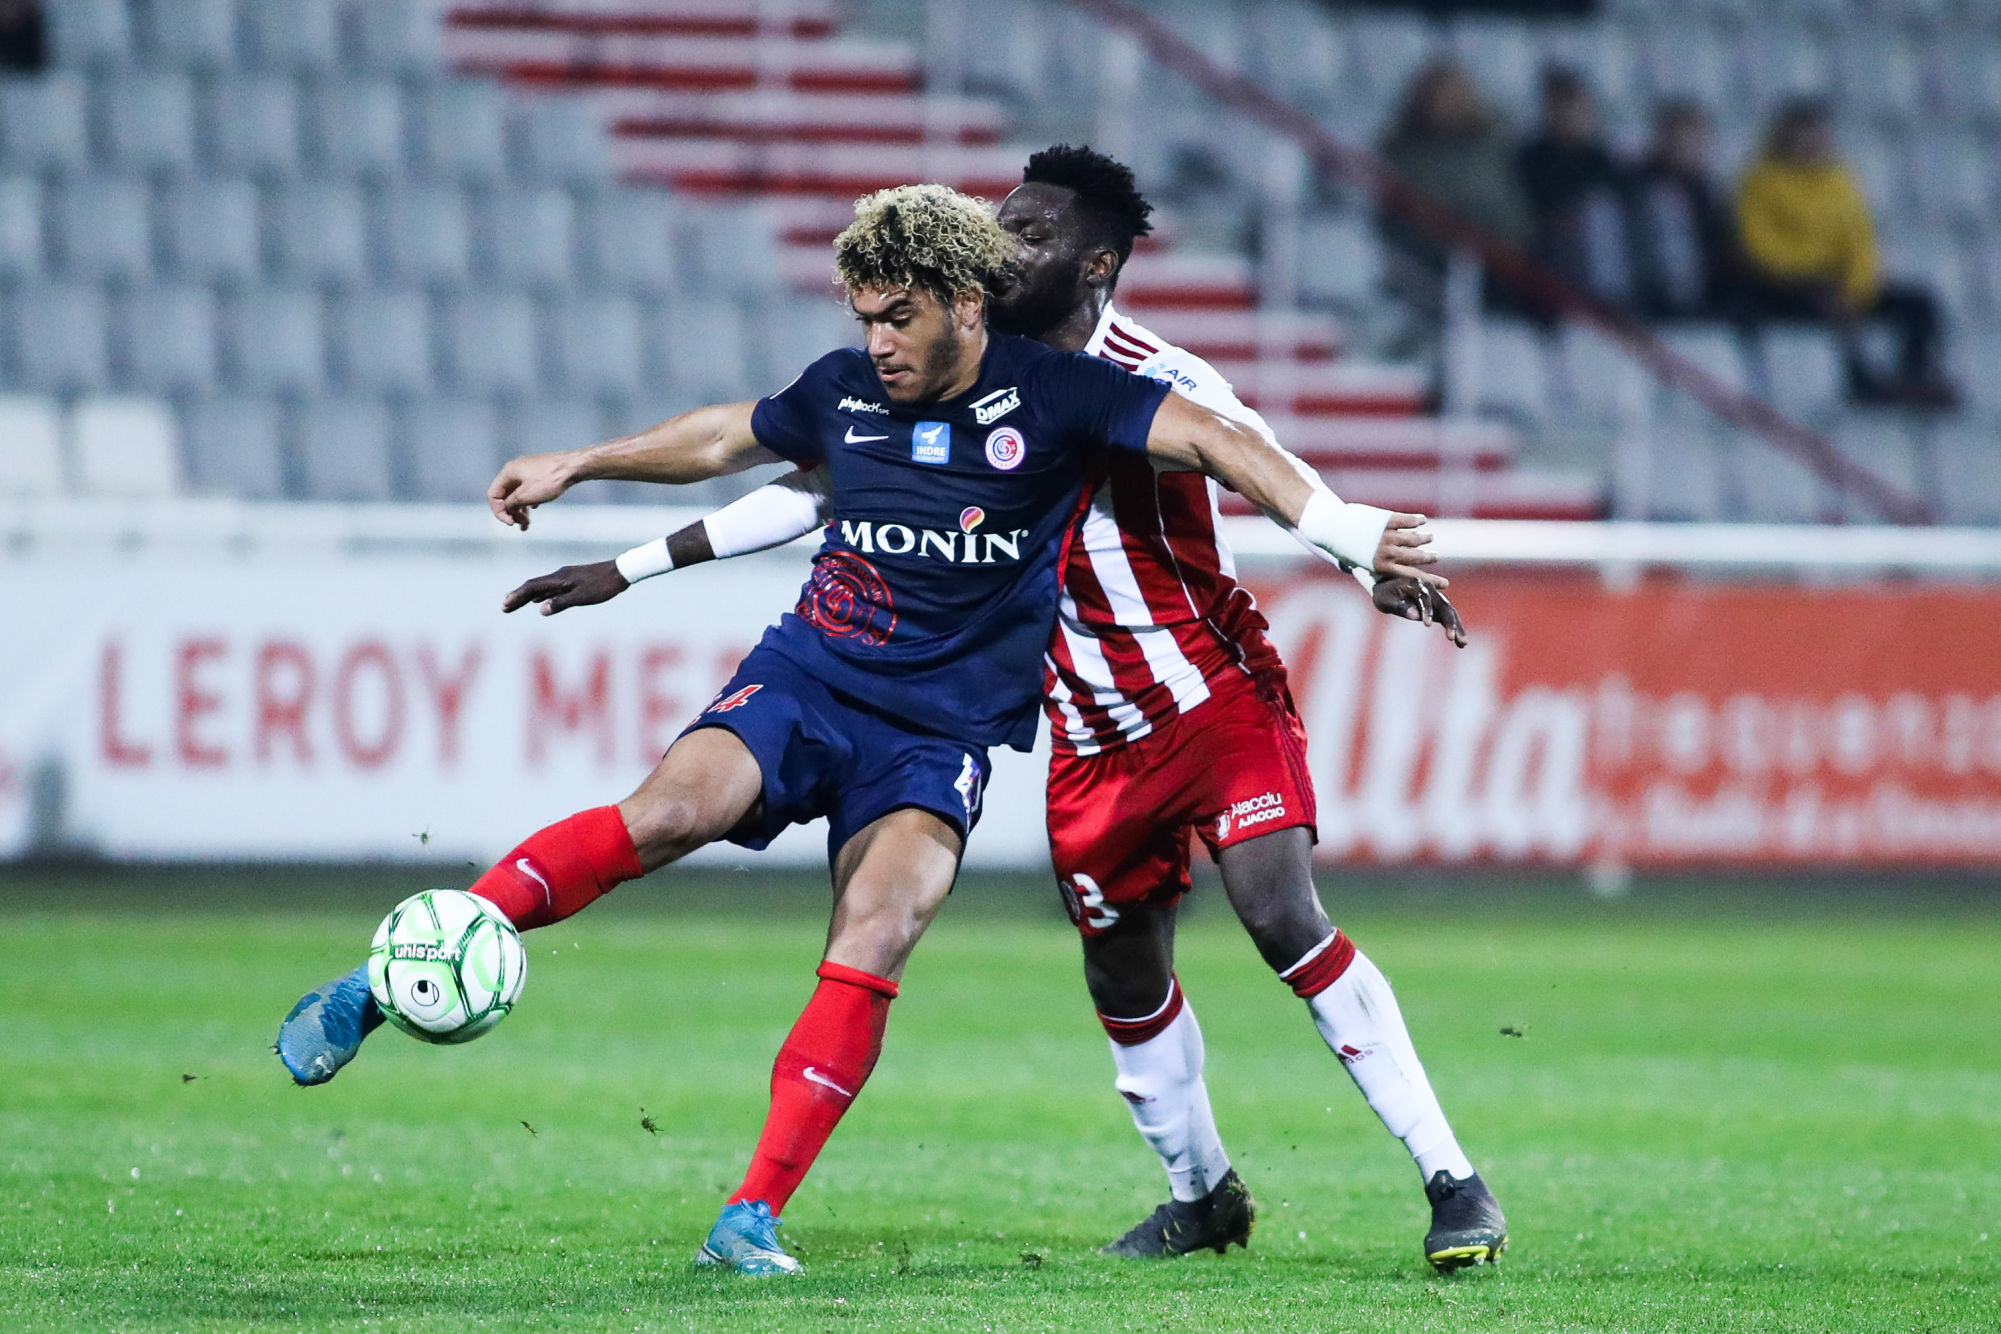 Alexis Goncalves Pereira of Chateauroux and Ismael Diallo of Ajaccio during the Ligue 2 match between Ajaccio and Chateauroux at Stade Francois Coty on January 31, 2020 in Ajaccio, France. (Photo by Michel Luccioni/Icon Sport) - Stade François-Coty - Ajaccio (France)